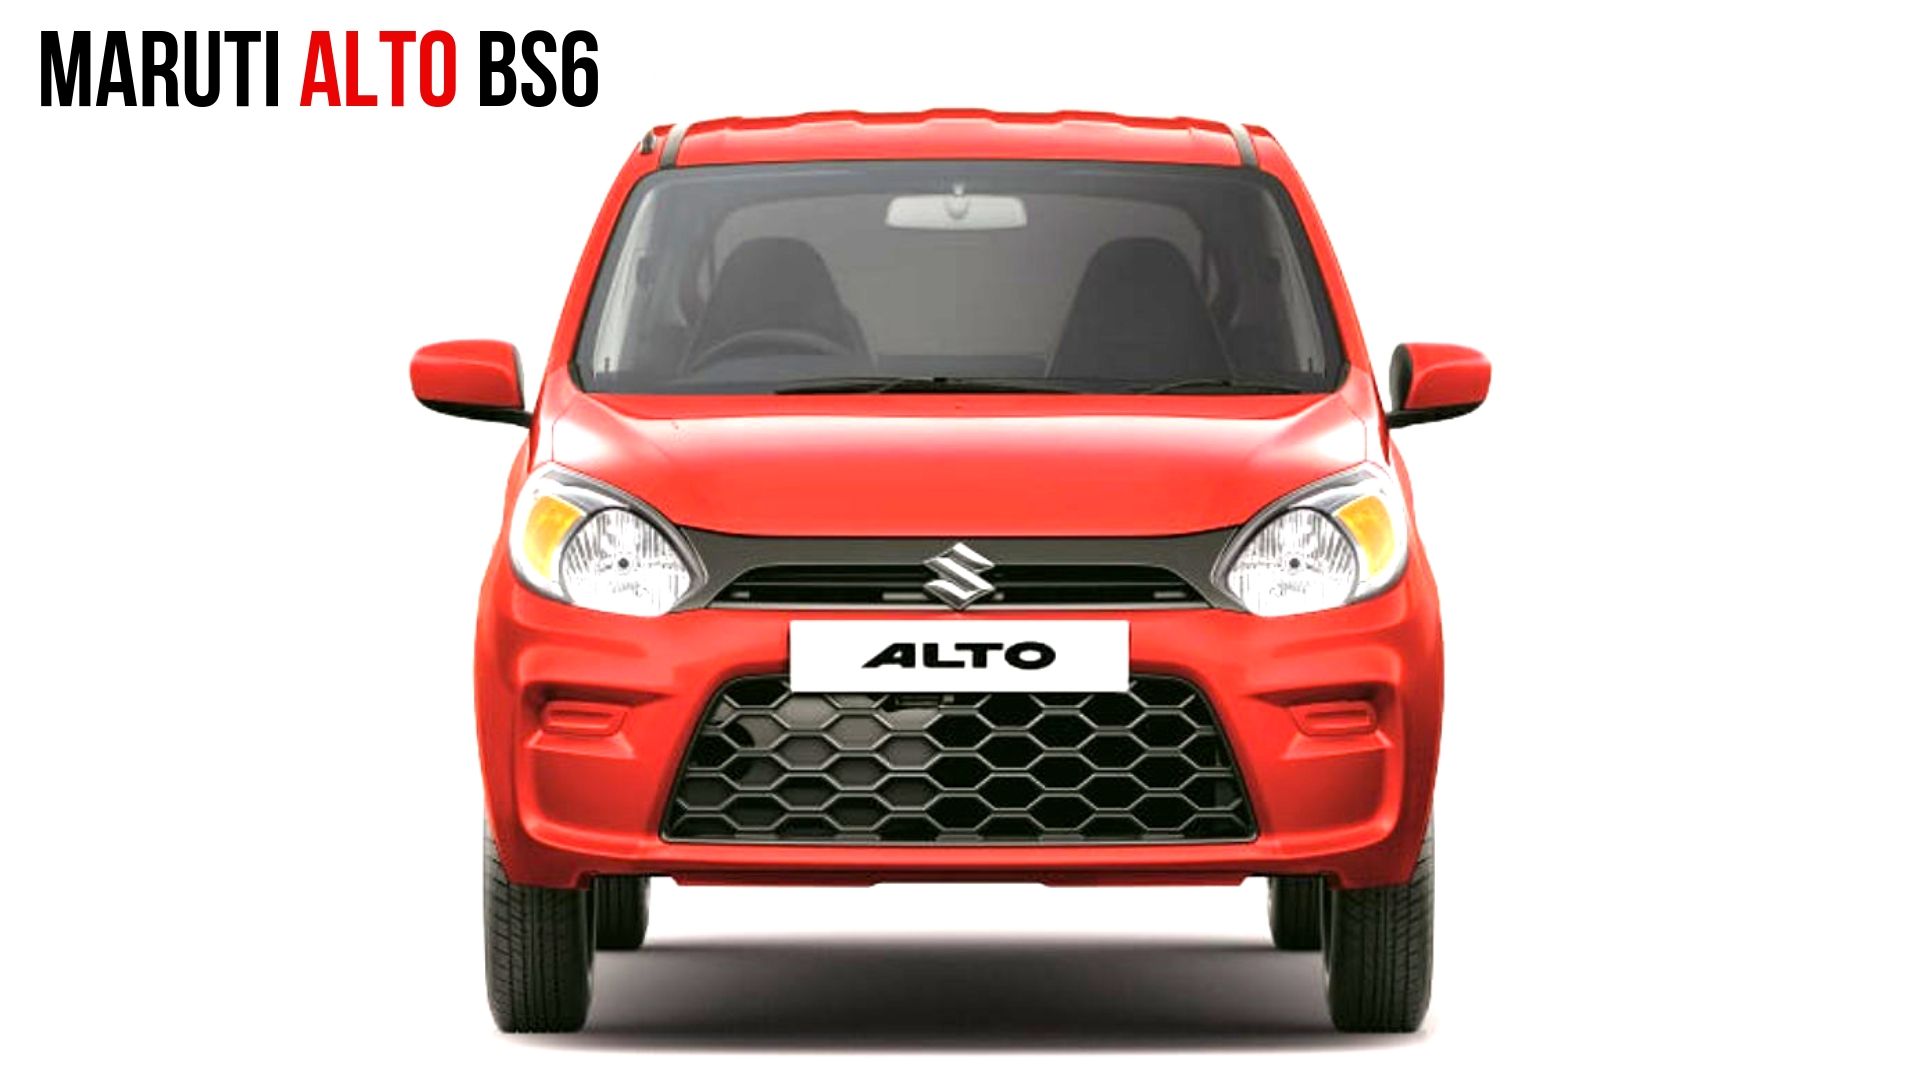 Maruti Alto800 Bs6 From Just Rs 2 33 Lakh In September 2019 Details